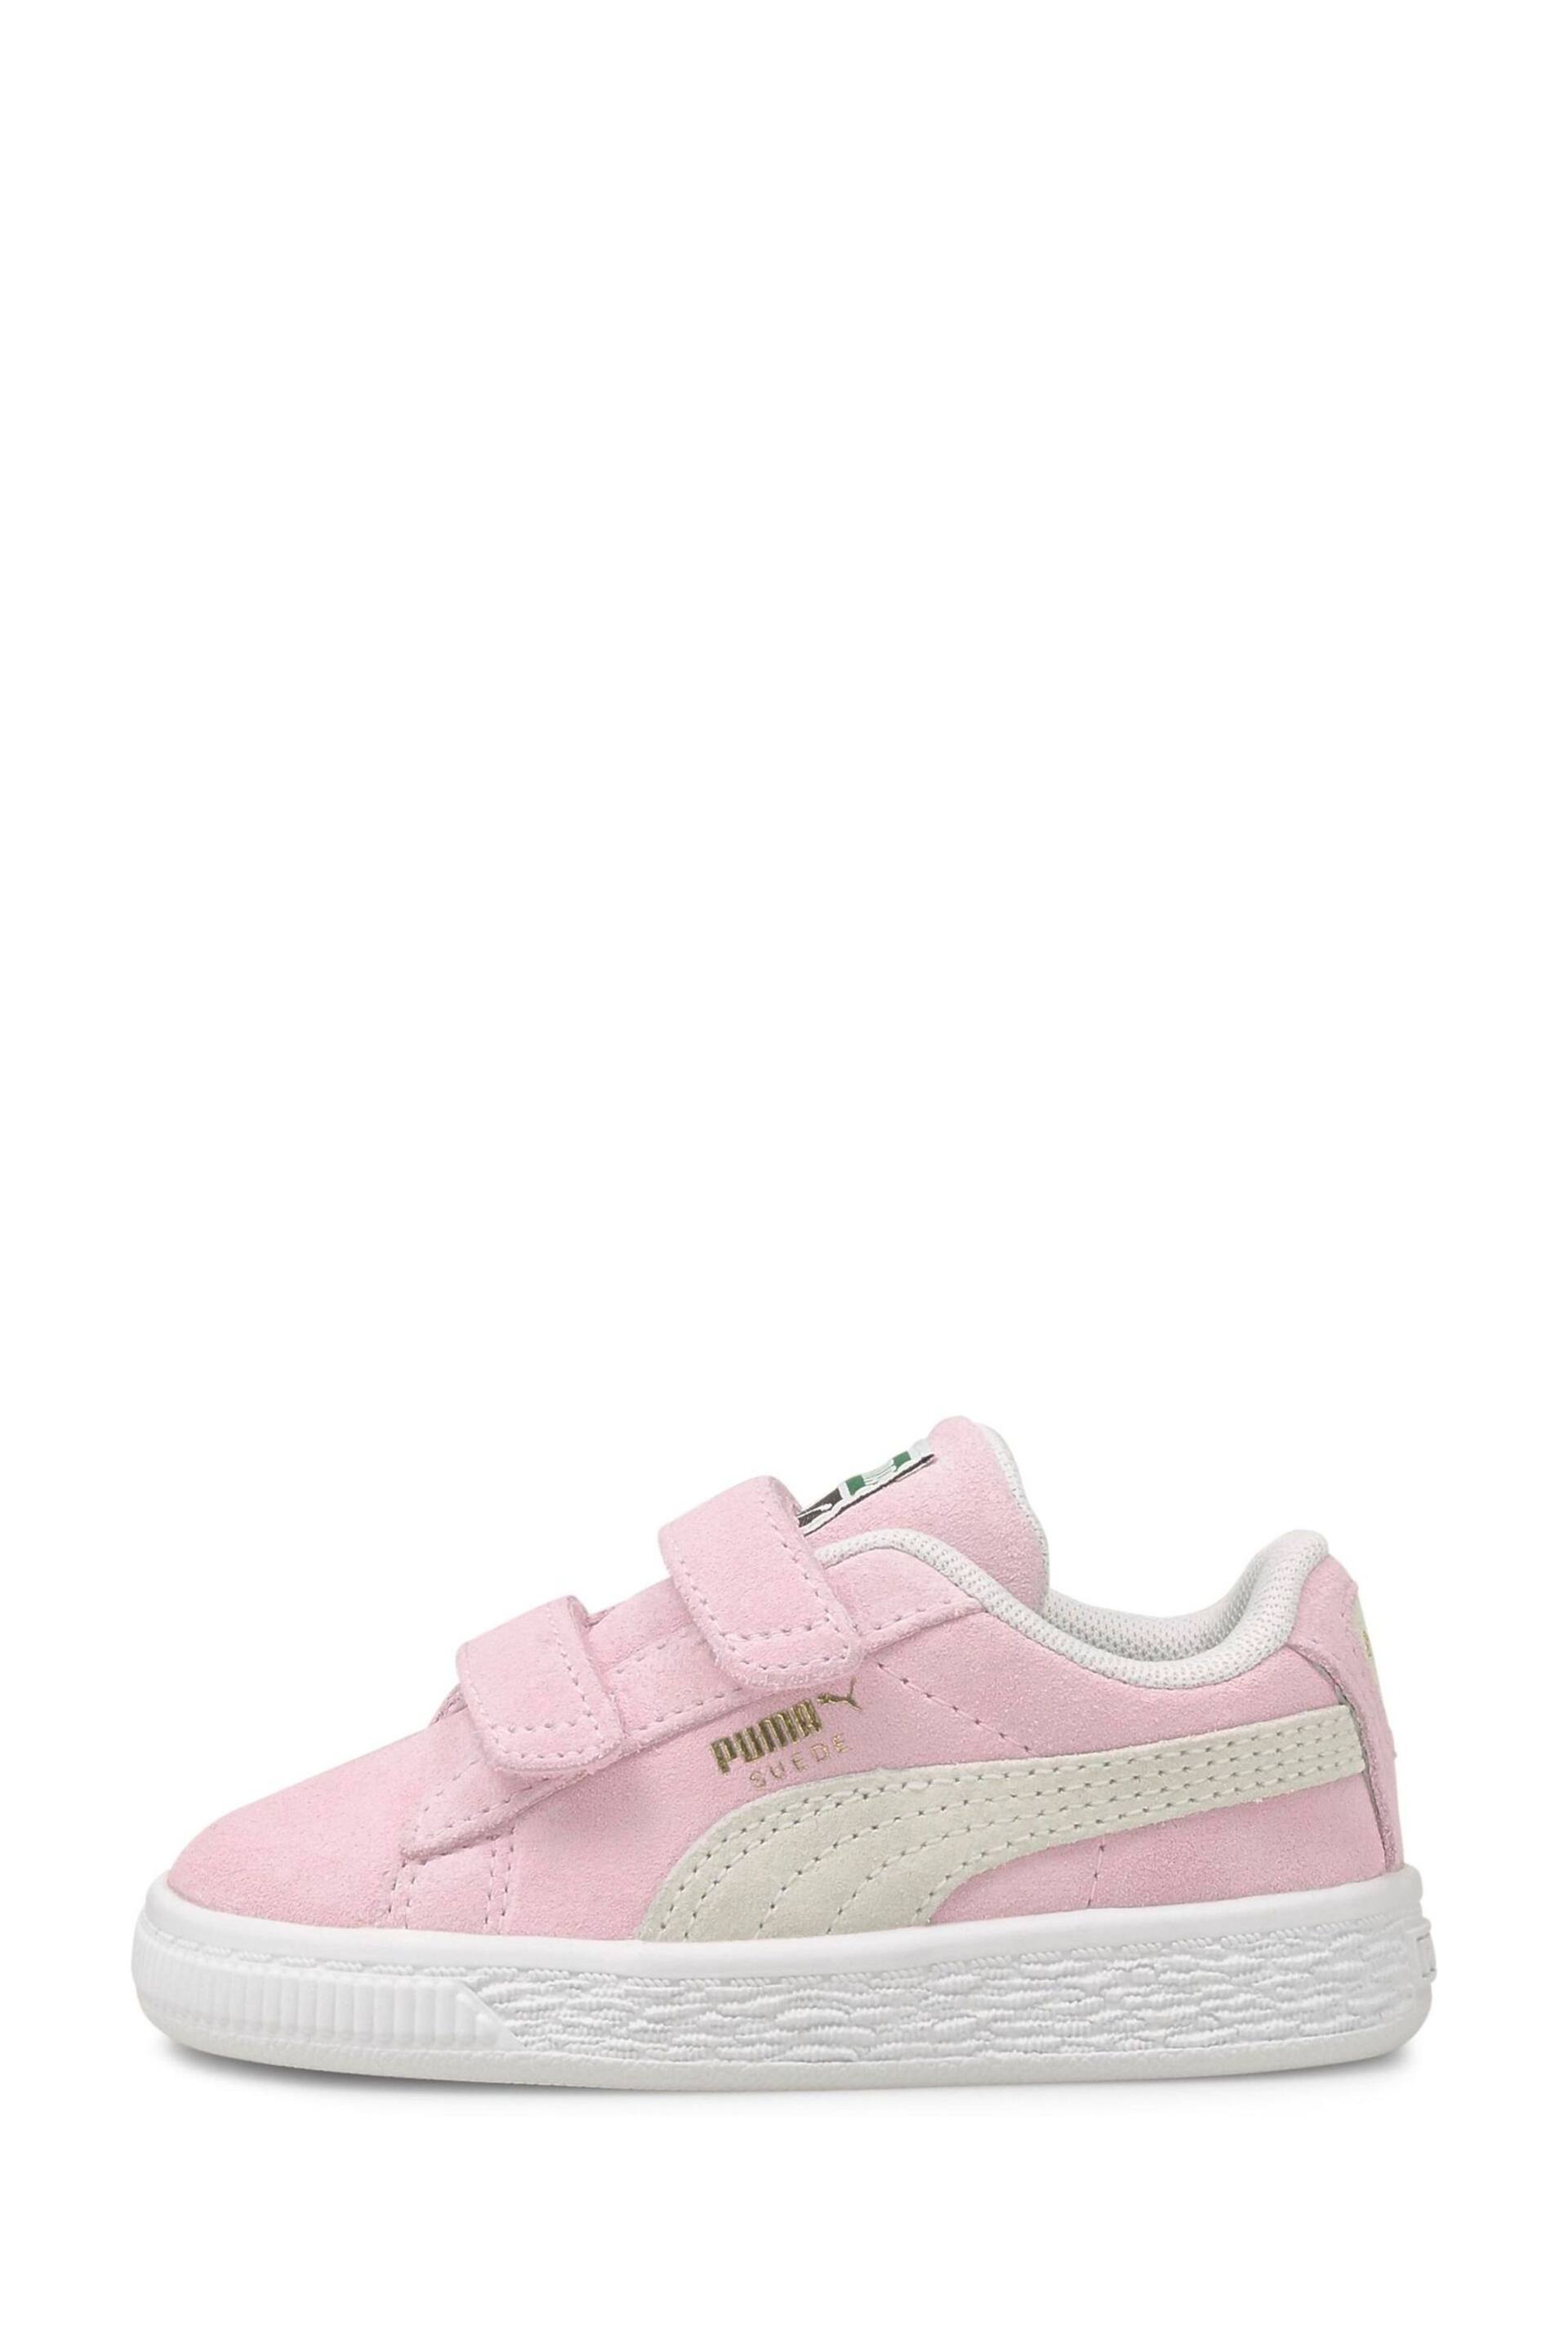 Puma Pink Babies Suede Classic XXI Trainers - Image 2 of 5